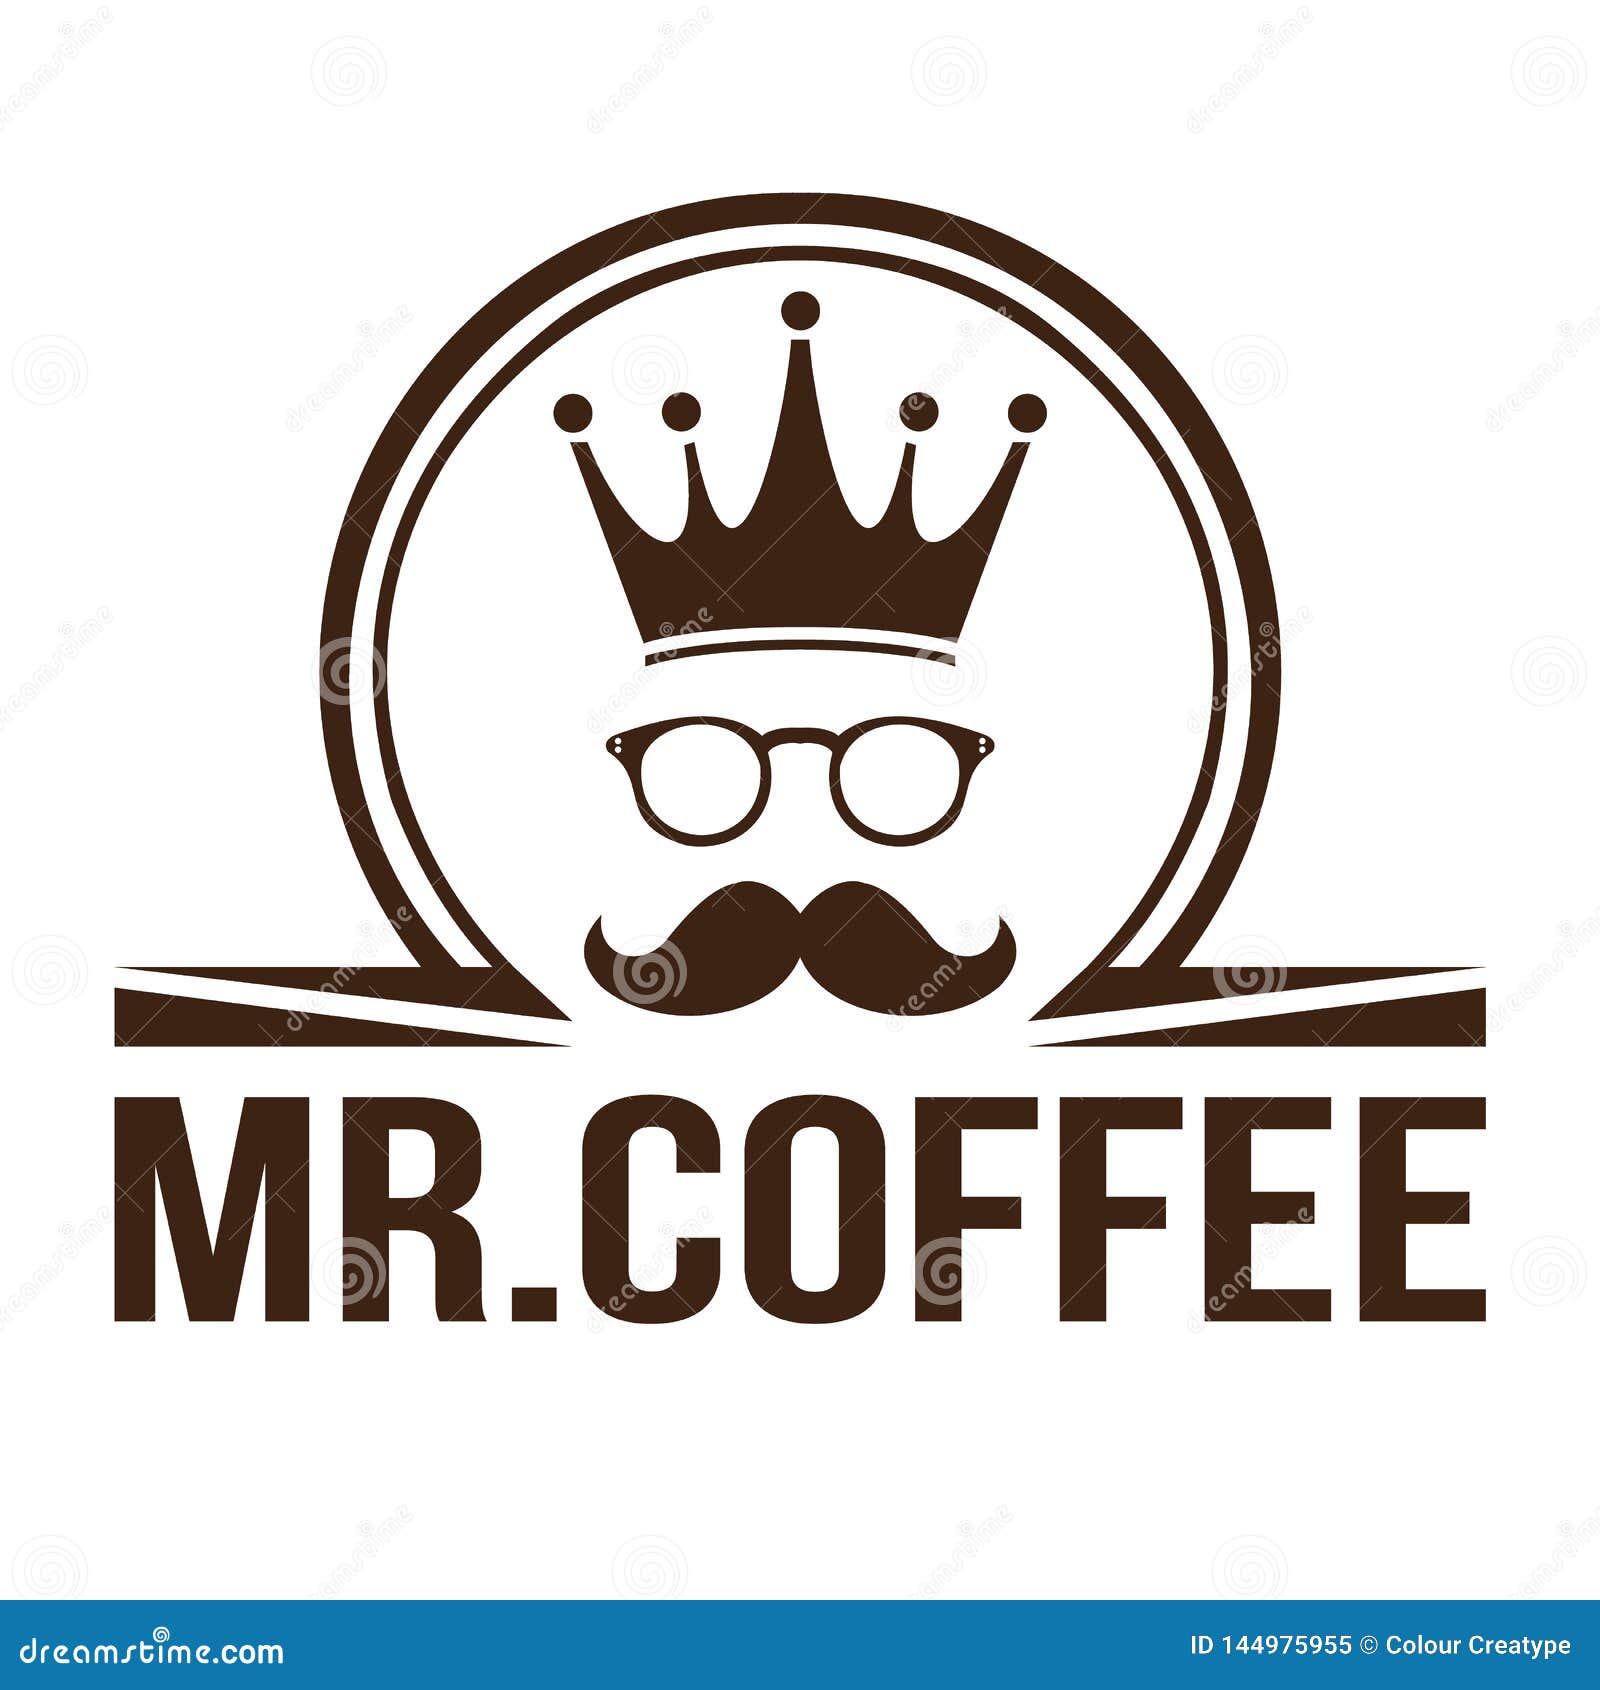 Mister coffee logo template. Coffee shop logo. Combined the cup of